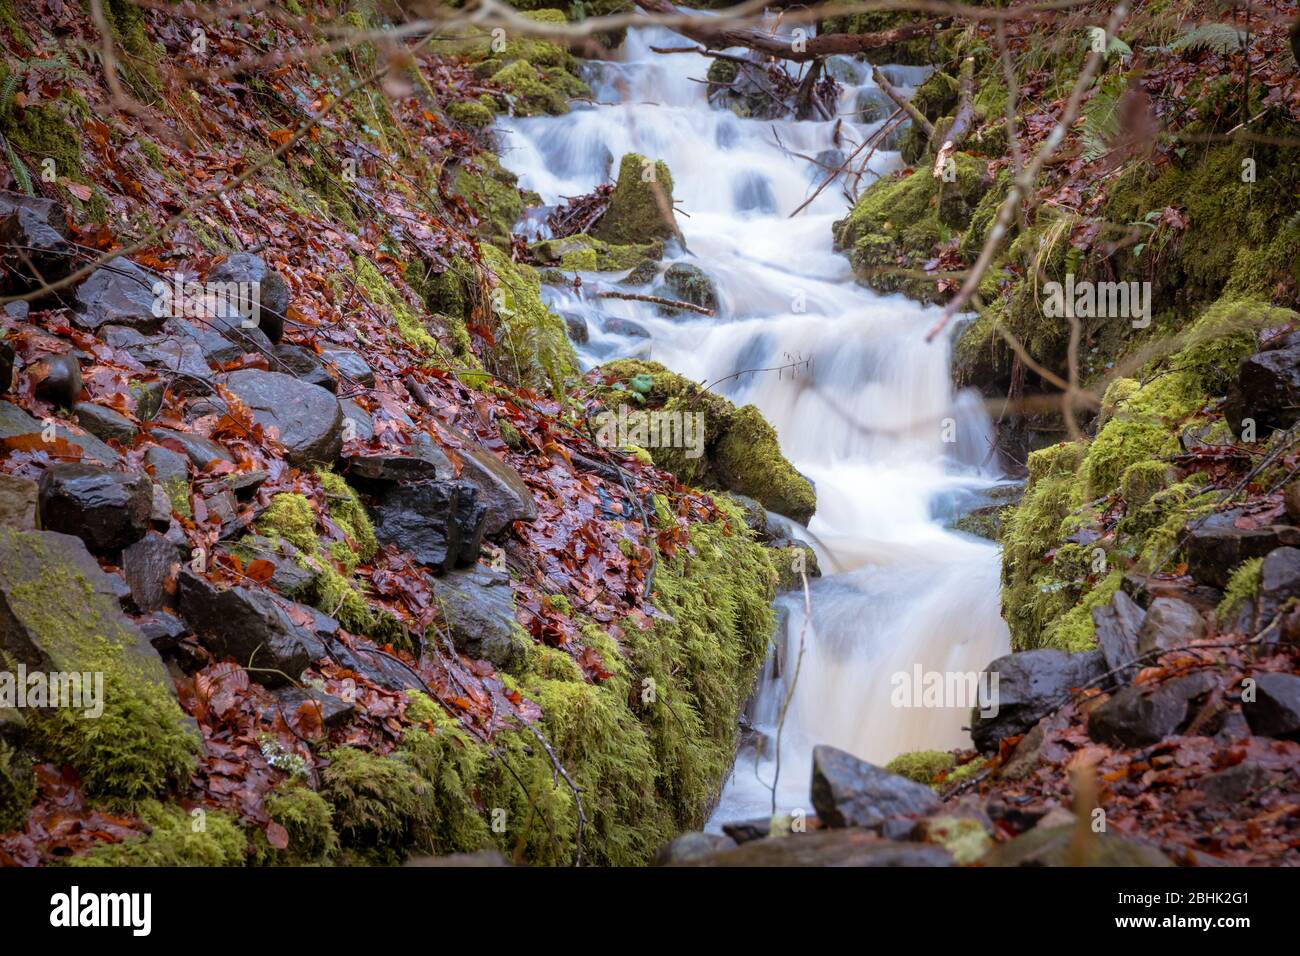 Small waterfall down rocks in a mossy autumnal forest. Long exposure. Stock Photo